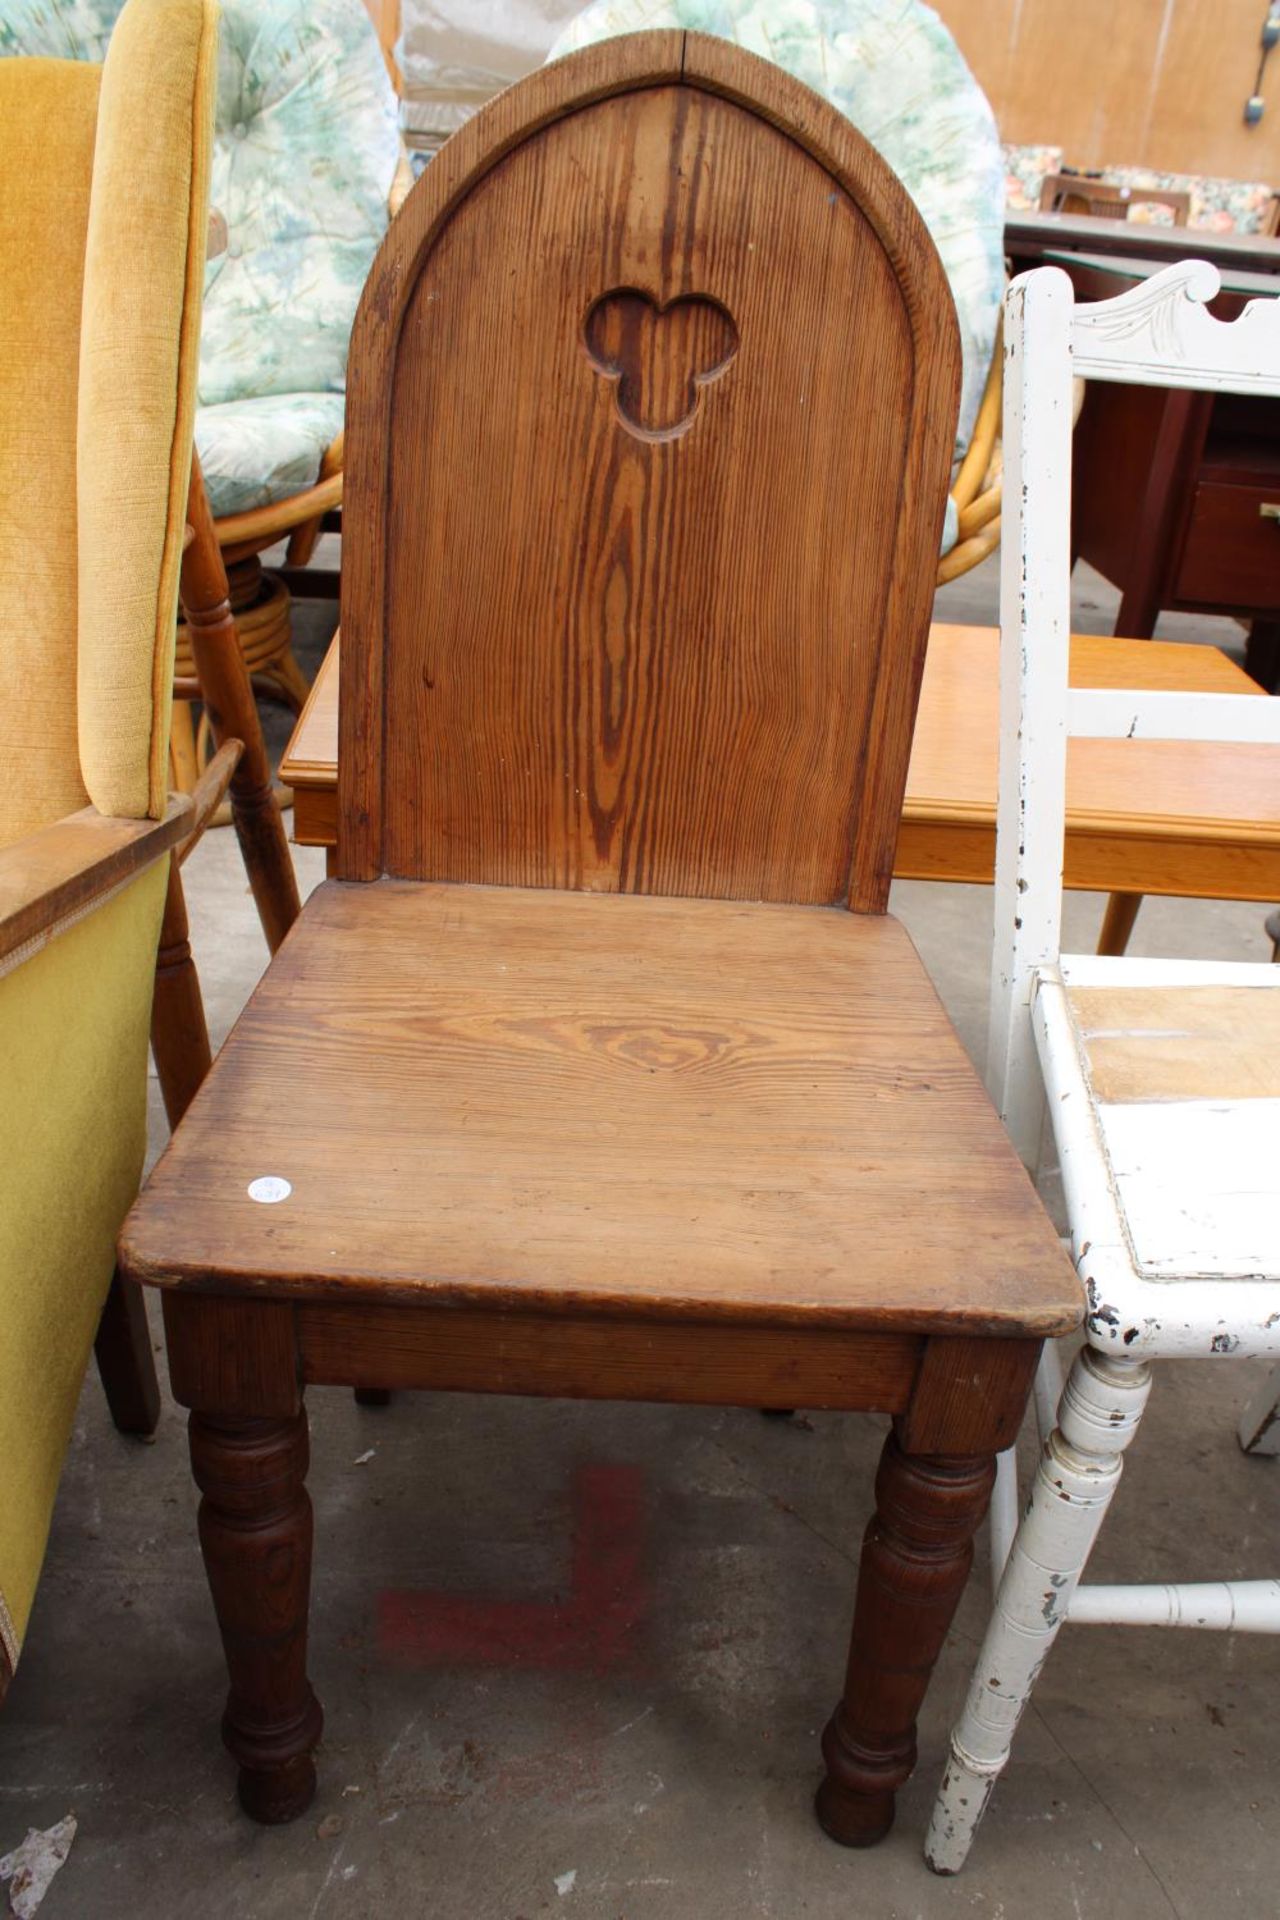 A VICTORIAN PITCH PINE HALL CHAIR AND A PAINTED BEDROOM CHAIR - Image 2 of 2